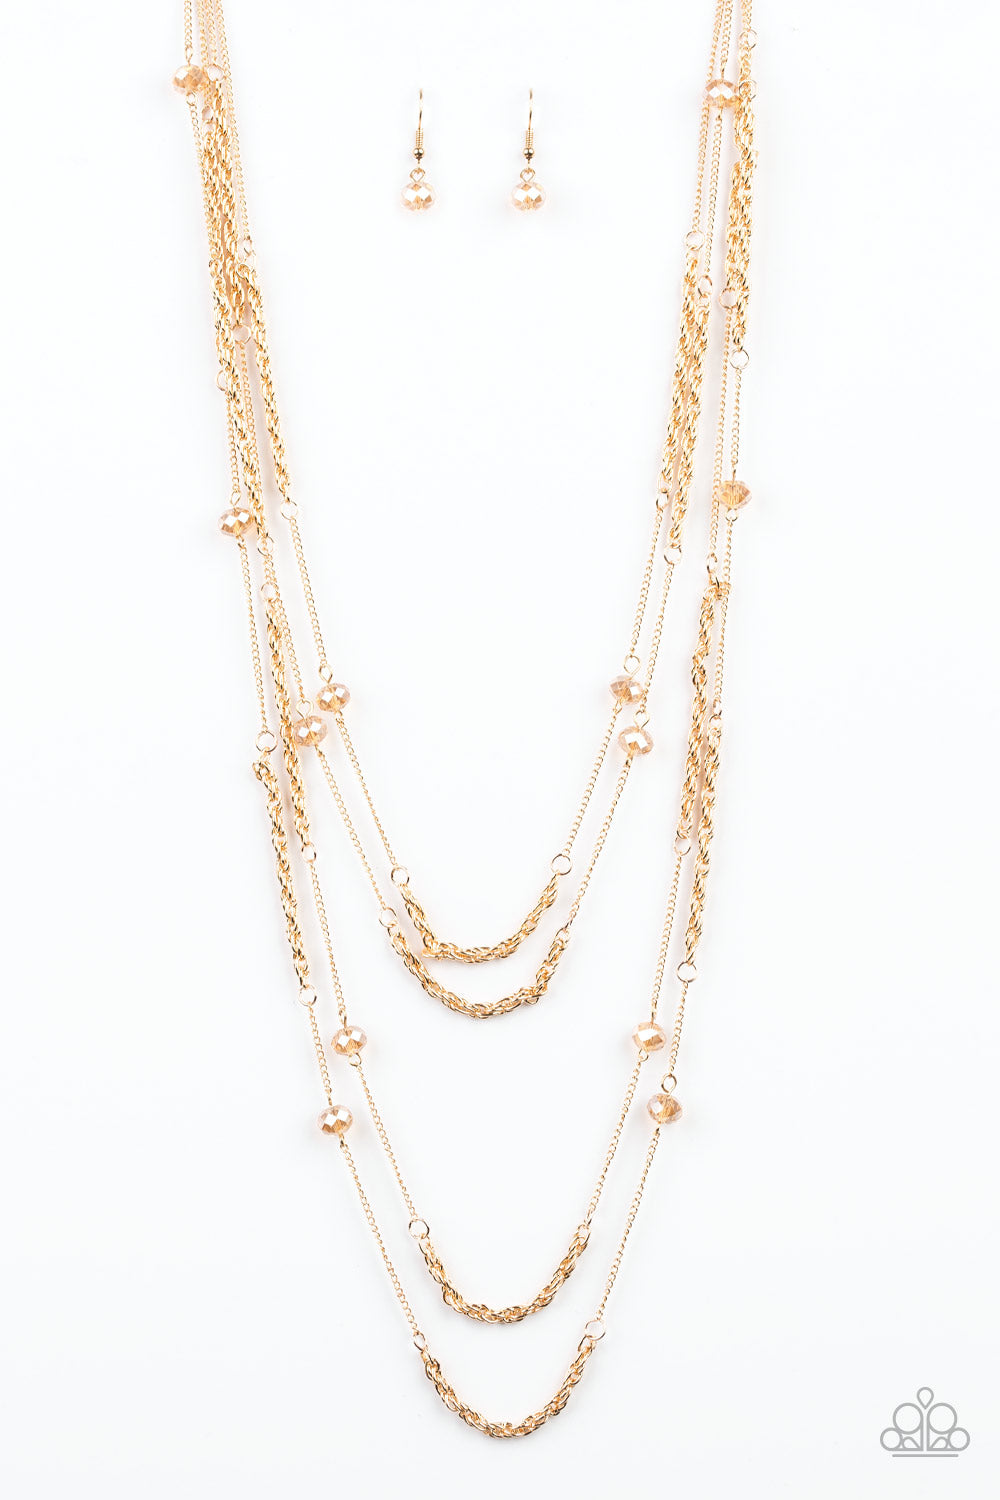 OPEN FOR OPULENCE - GOLD IRIDESCENT NECKLACE